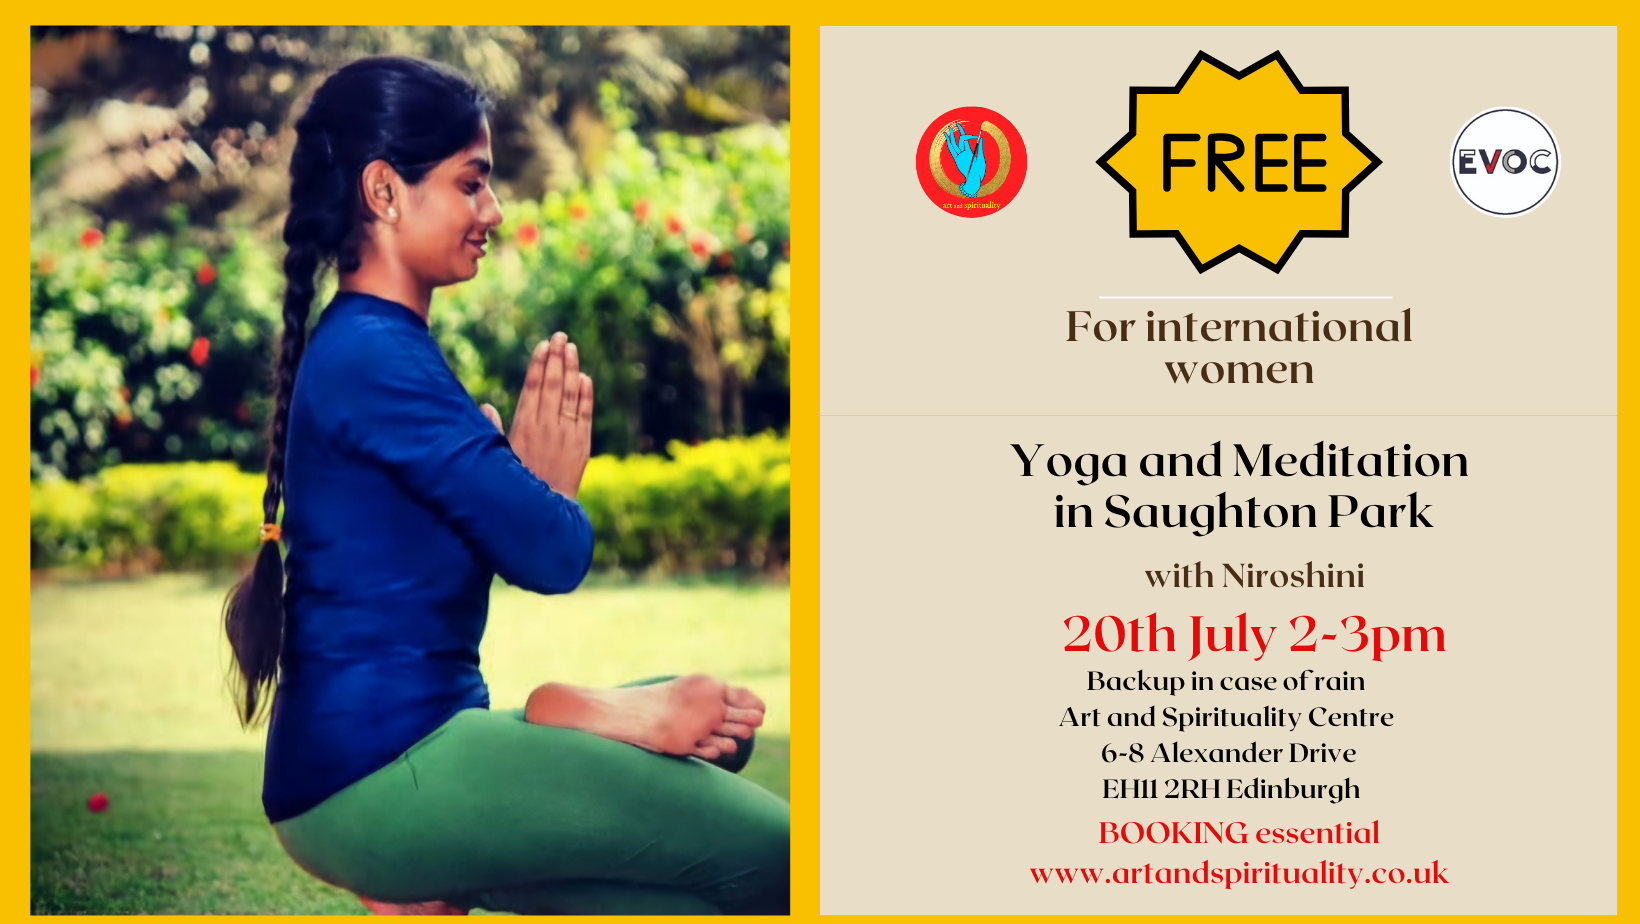 20th July: FREE YOGA AND MEDITATION in the park for international women